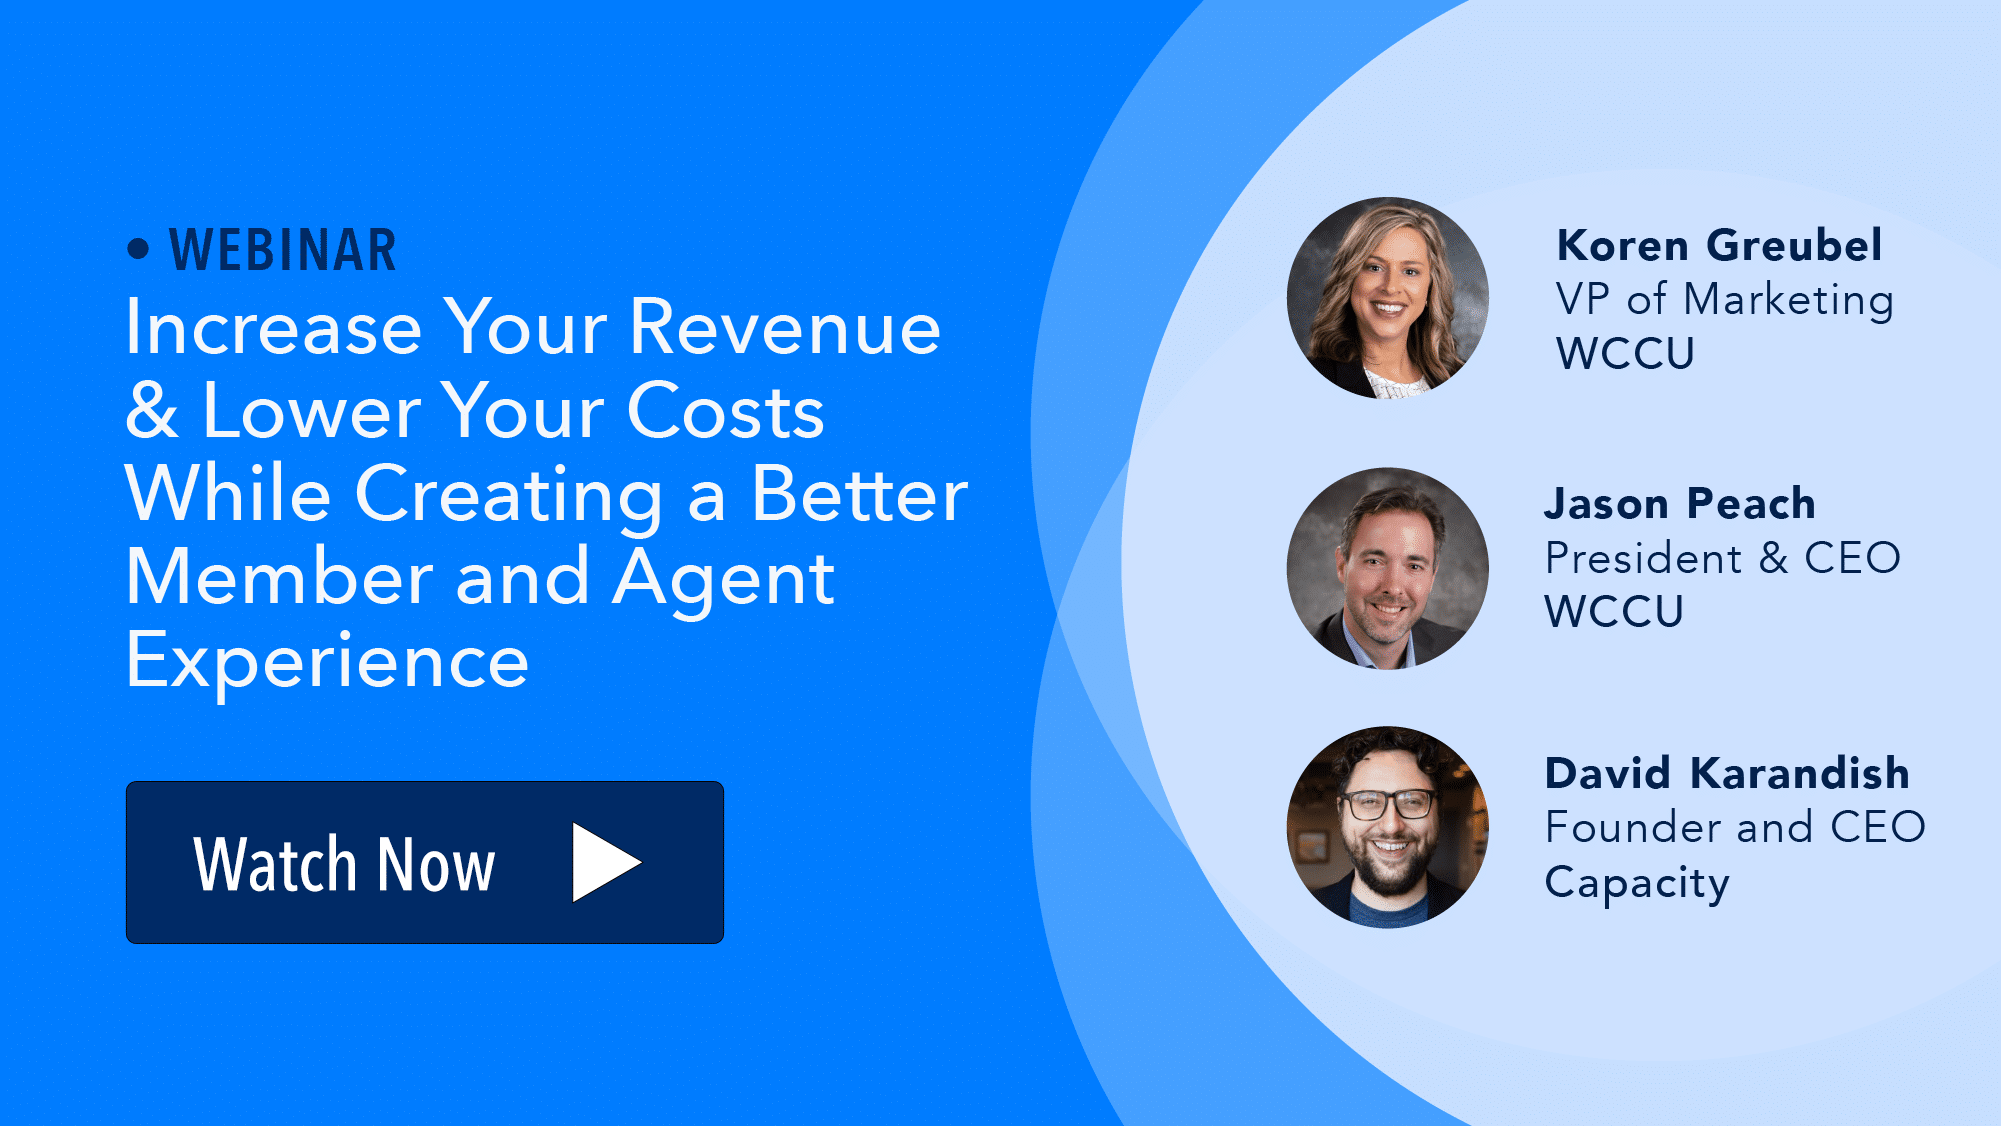 Increase Your Revenue and Lower Your Costs While Creating a Better Member and Agent Experience